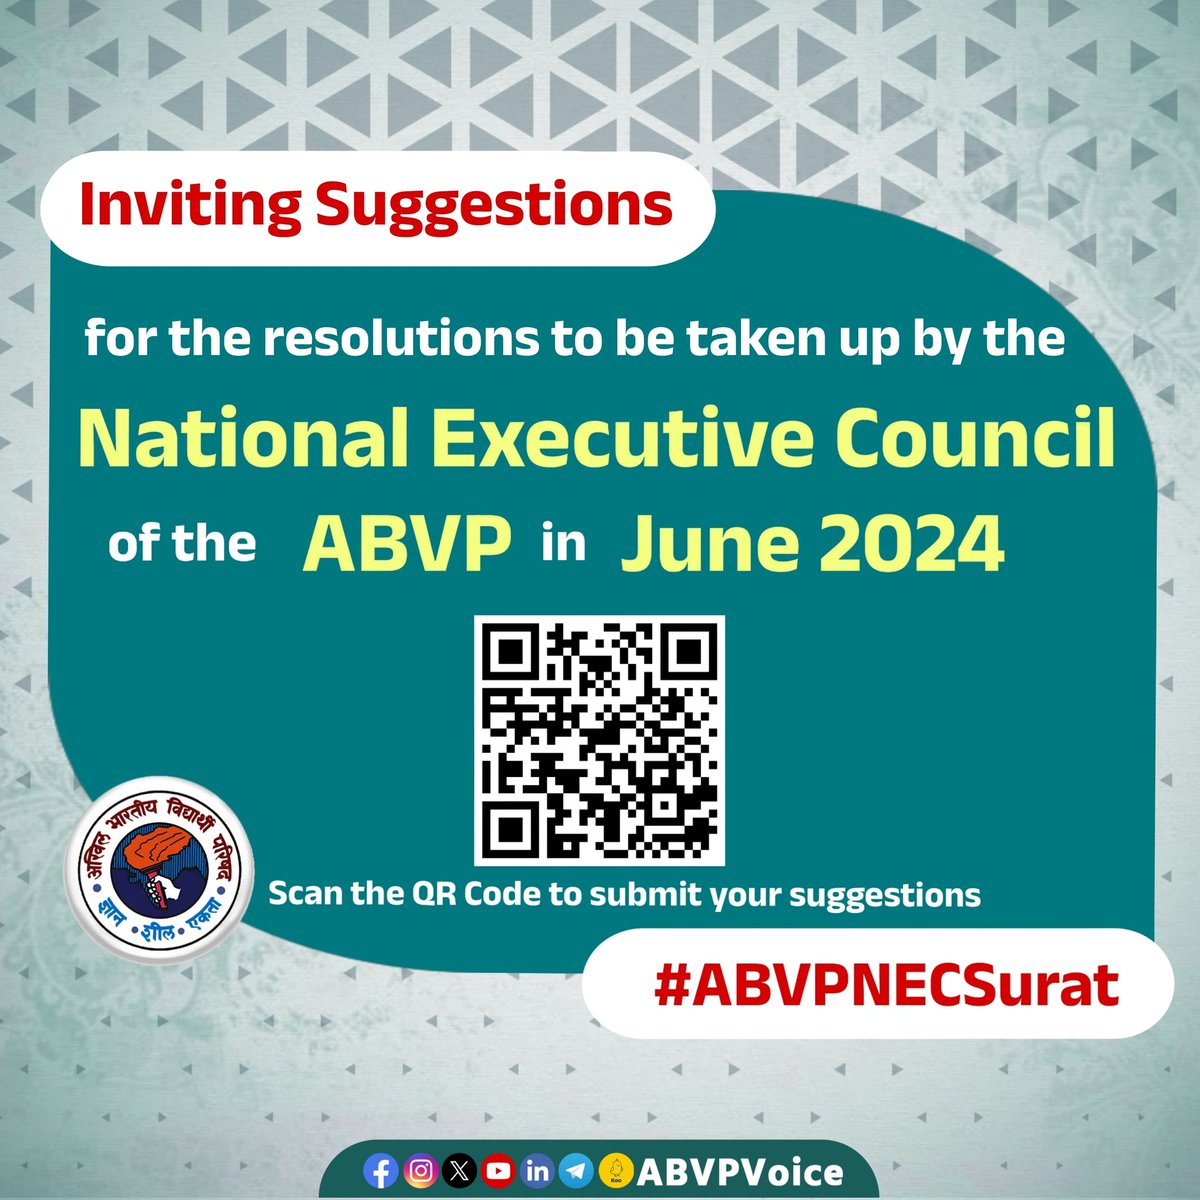 As we gear up for the National Executive Council meeting in June, we want to hear from YOU! 

Share your ideas on education, society,nation,and current scenarios.Your insights matter. Let's shape the agenda together for the #ABVPNECSurat.Together, let's pave the way forward!